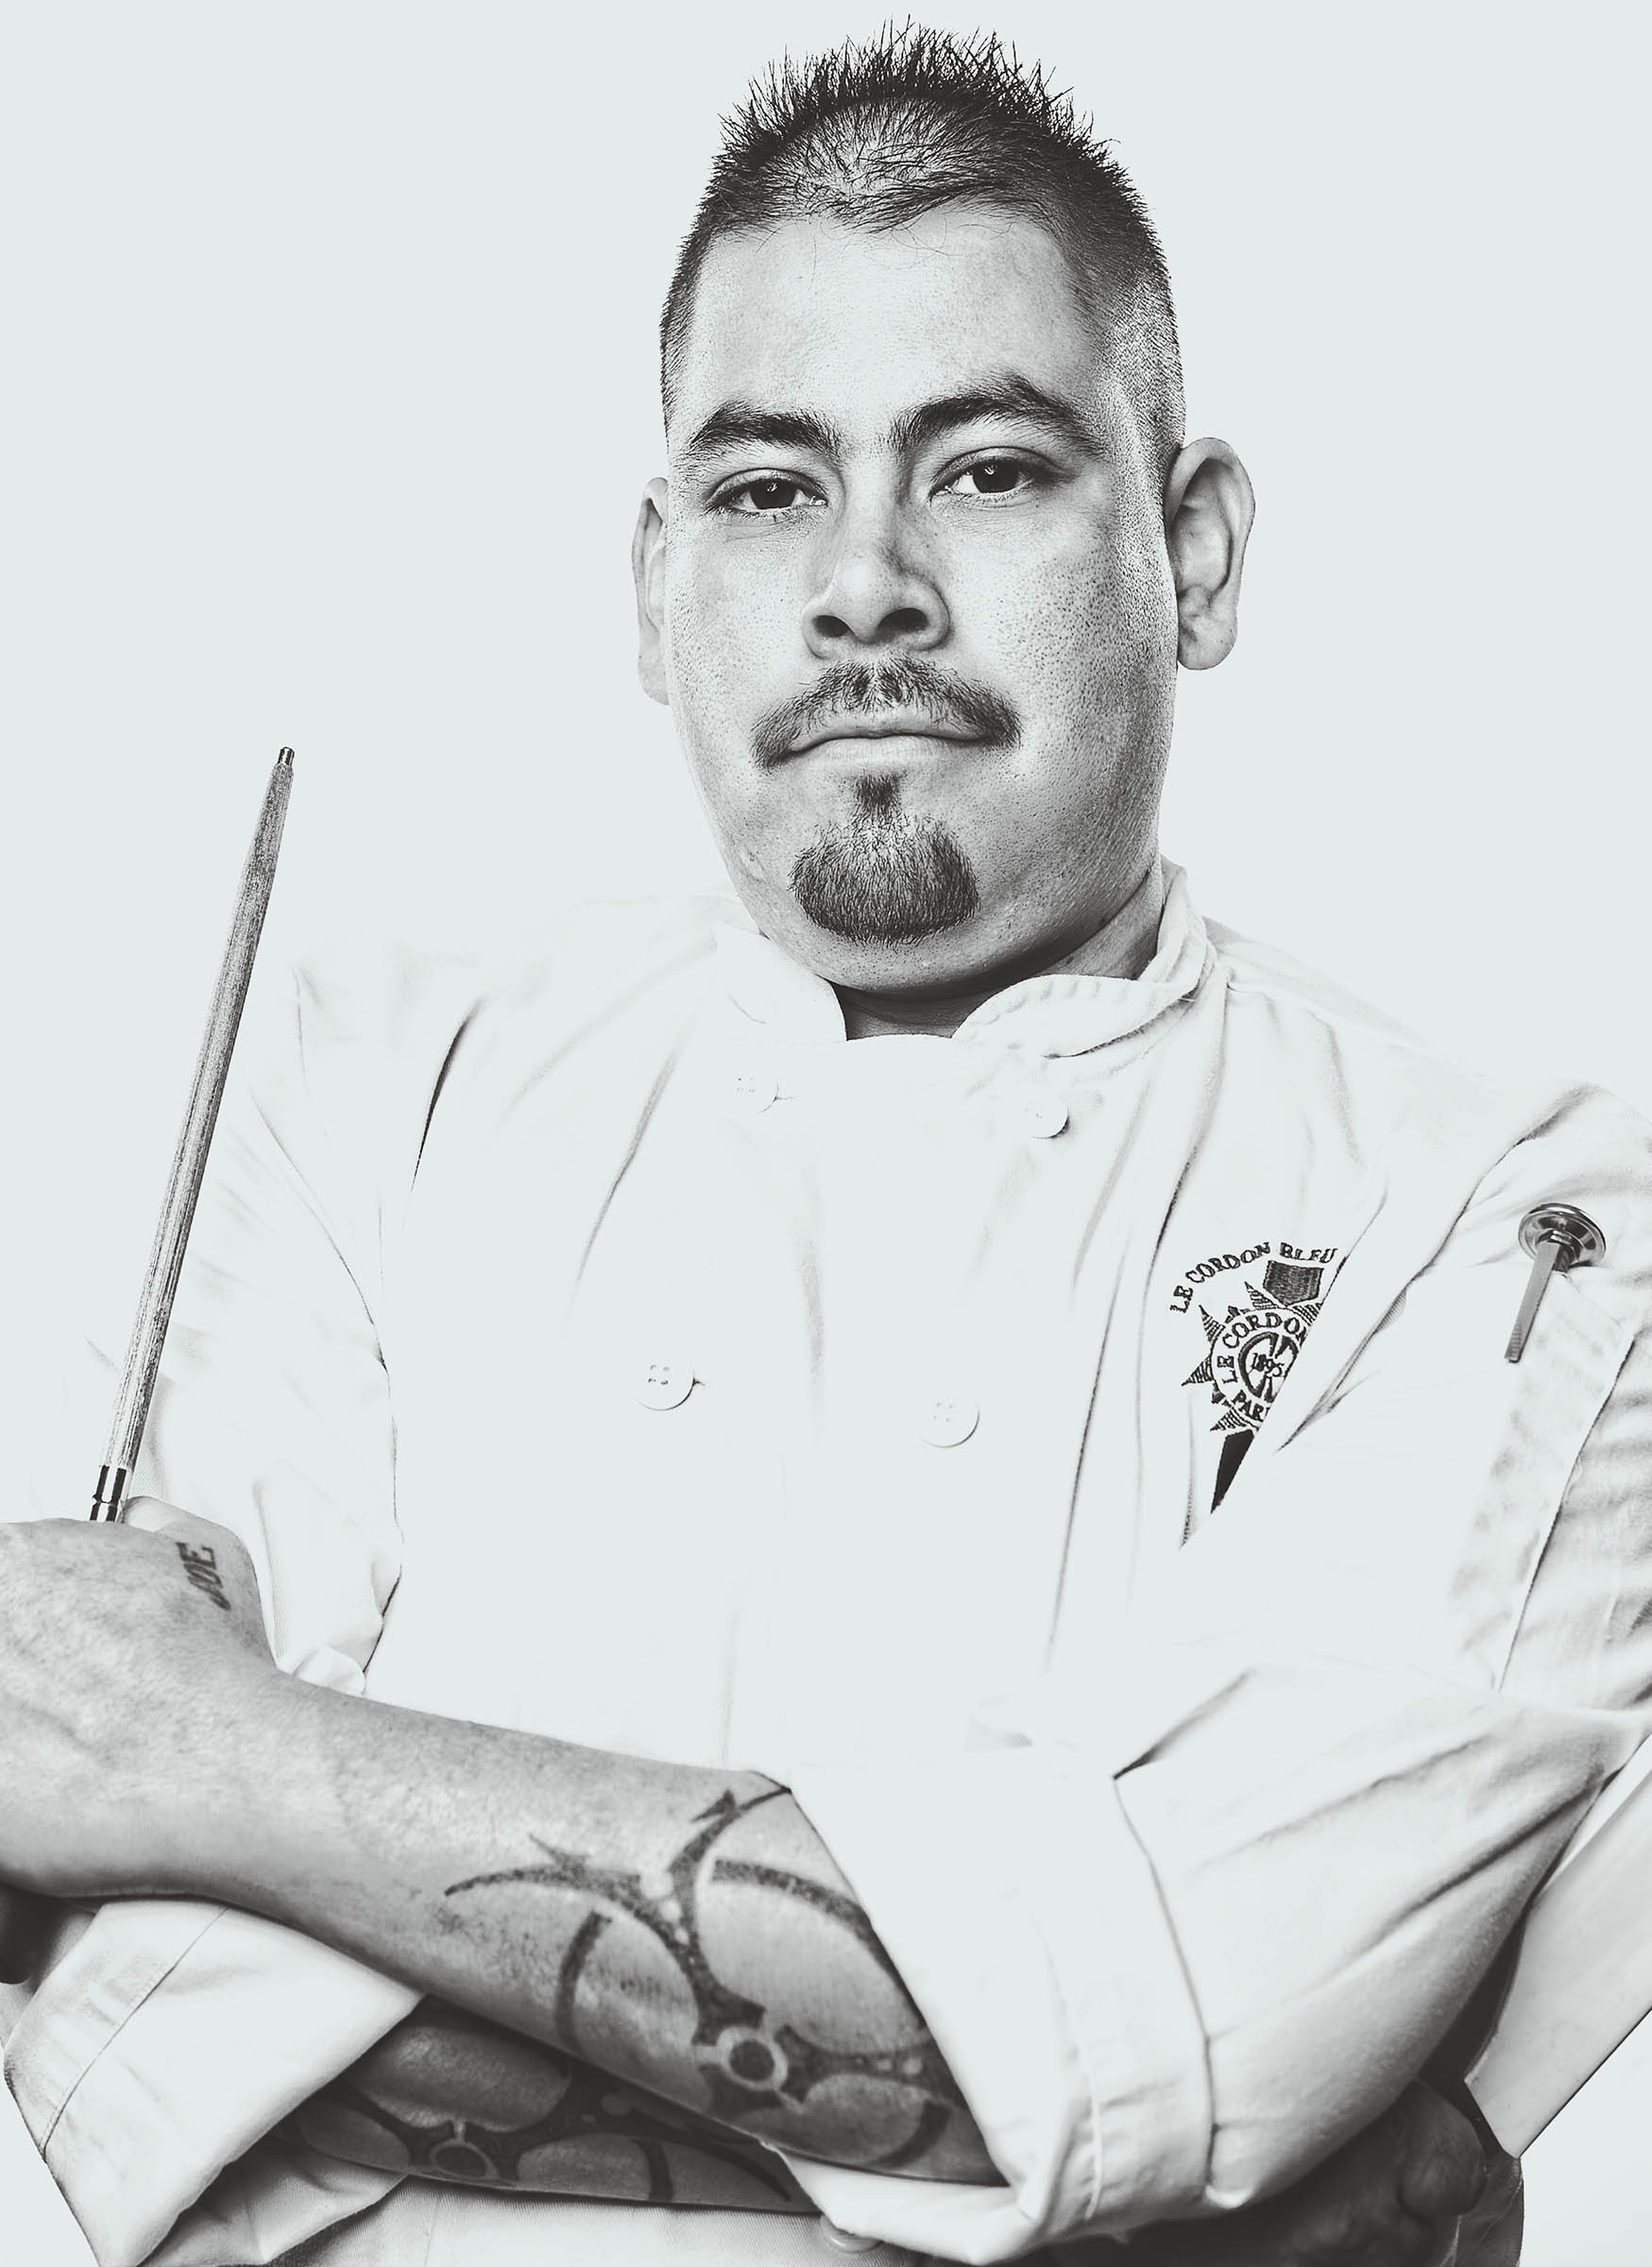 Chef Day Knife favorite tool Cordon Bleu Blue Top Chef Joe professional Portrait and for the very top award winning editorial Portrait Photographer in NYC LA Paris and London choose Wick Beavers